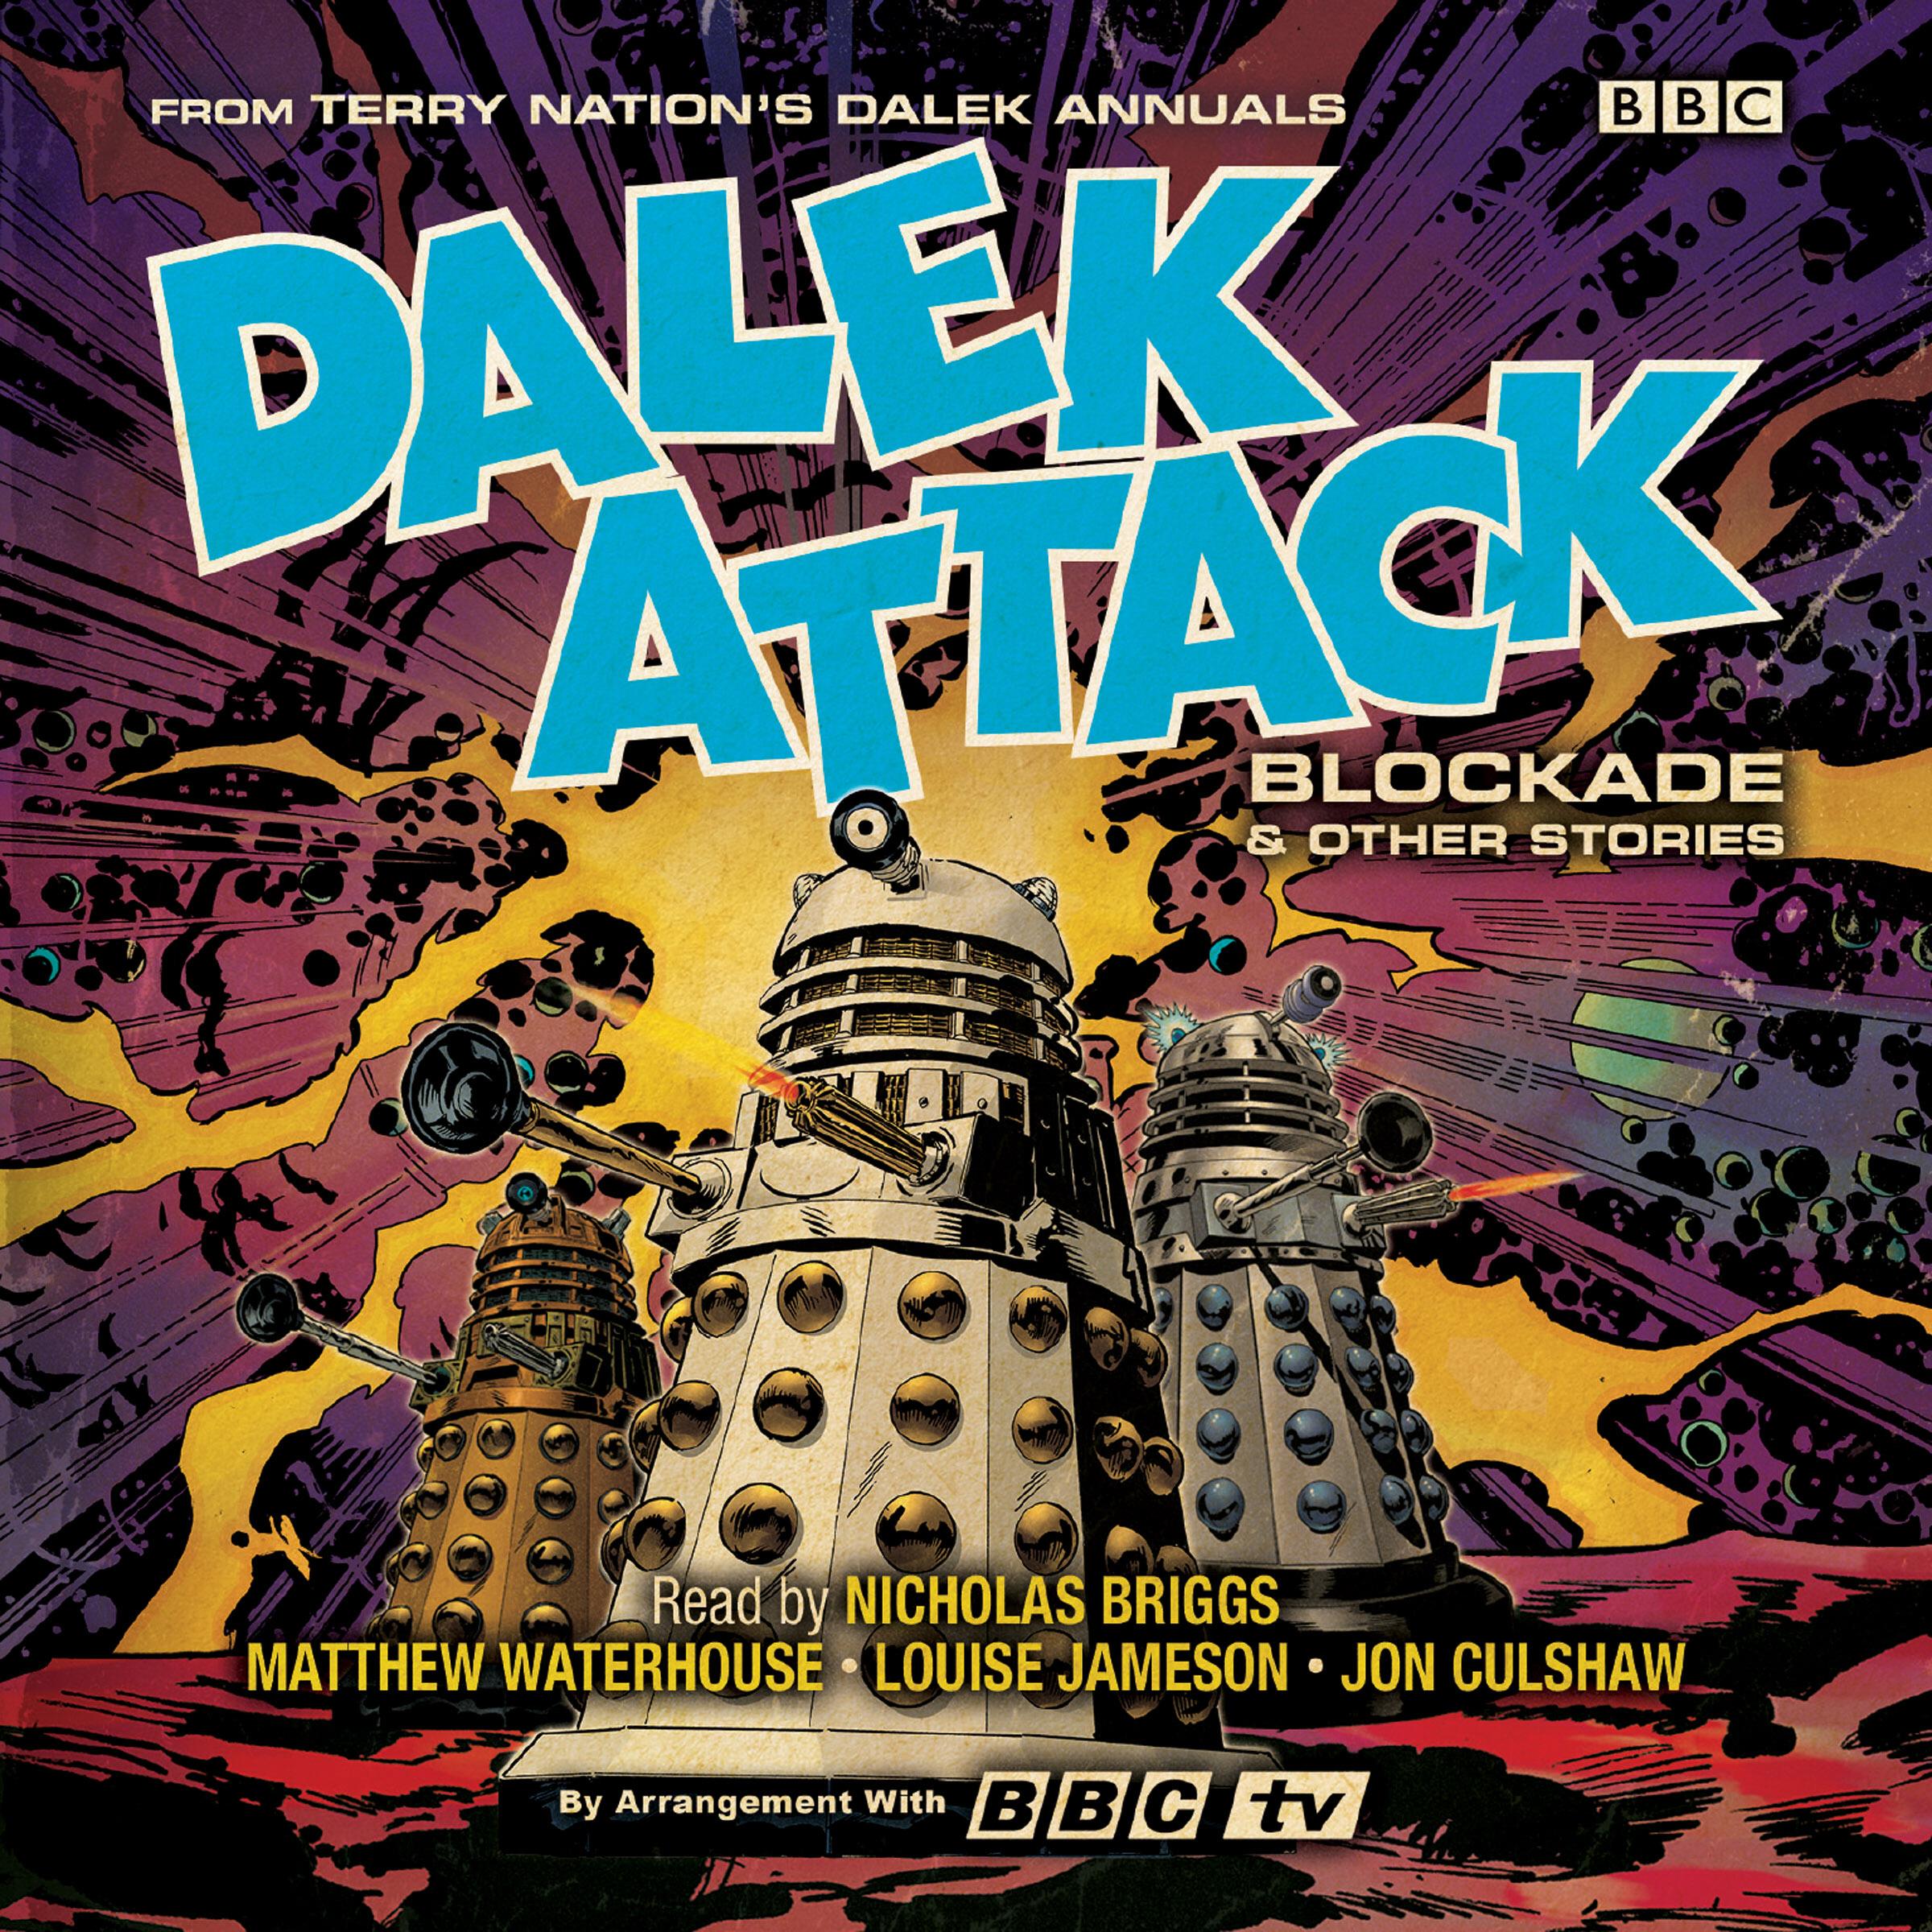 Dalek Attack: Blockade & Other Stories from the Doctor Who u - Terry Nation